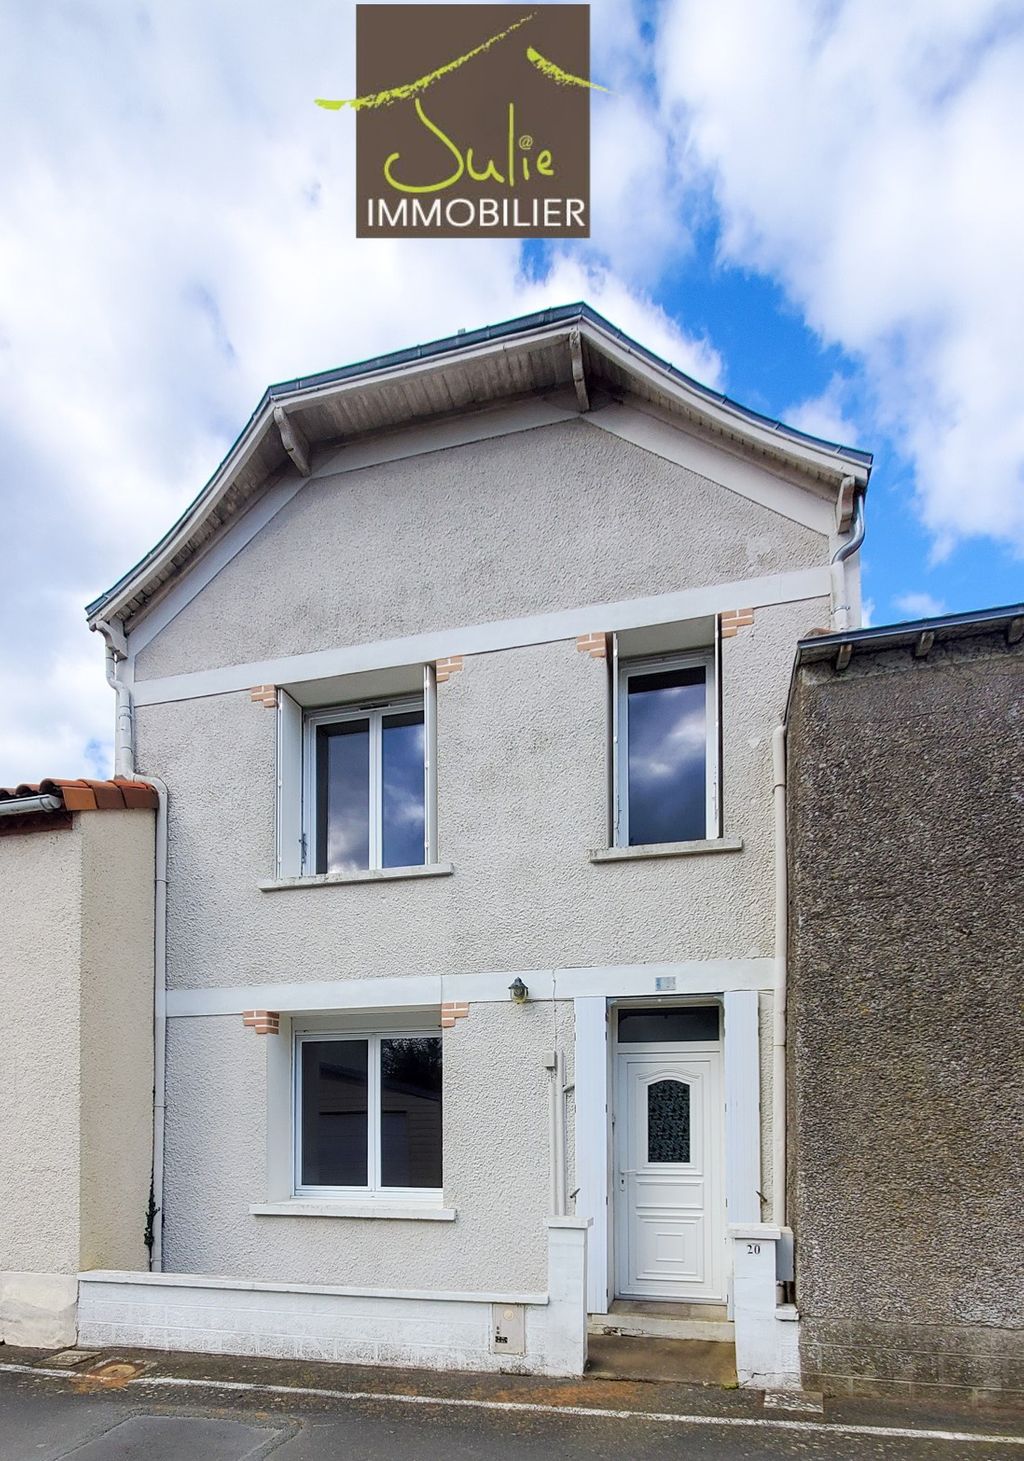 Achat maison 2 chambre(s) - Courlay